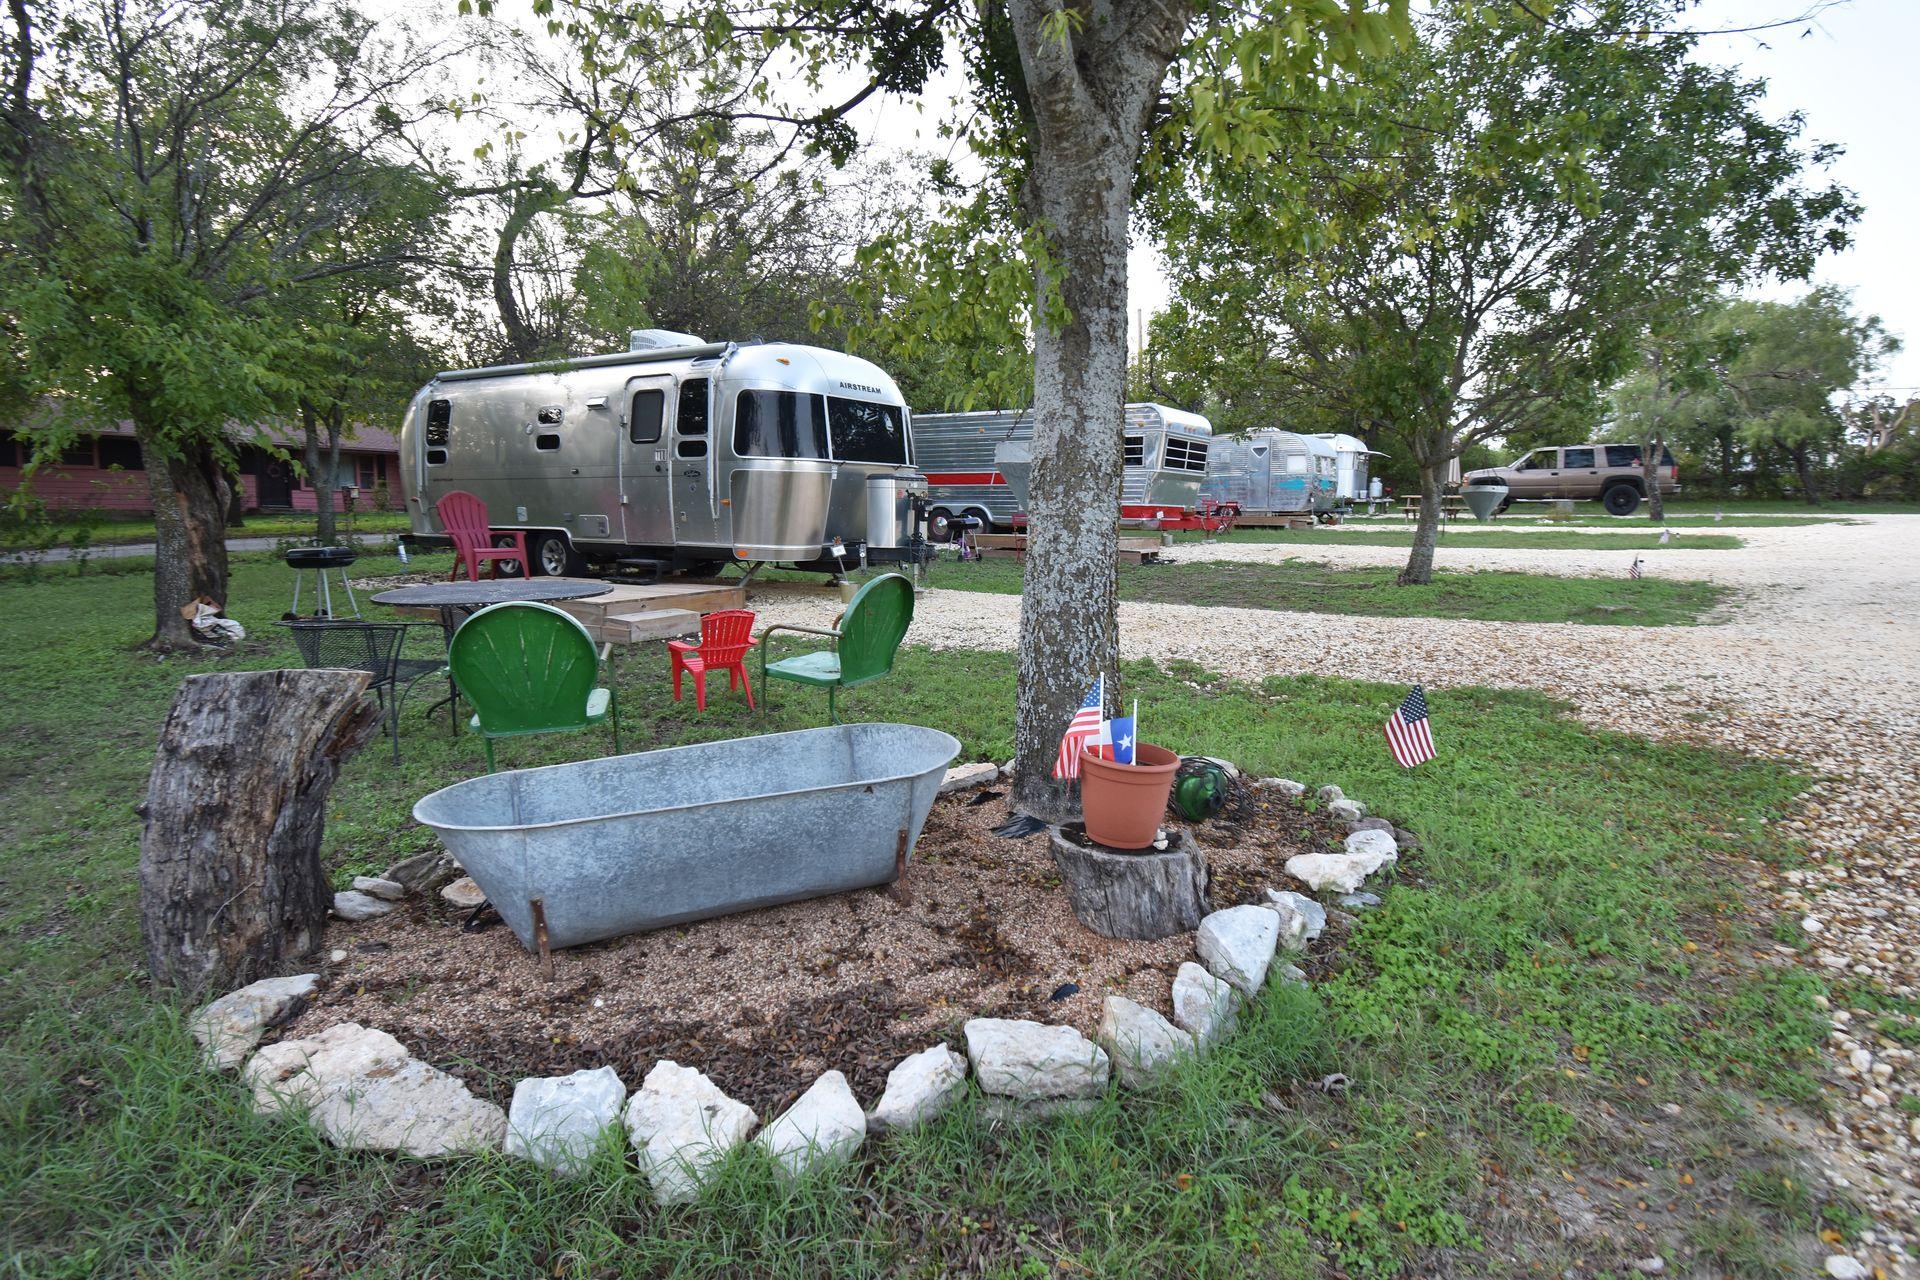 A row of airstreams and trailers at the Off the Vine RV Park. In the foreground, there is a vintage bathtub decoration.